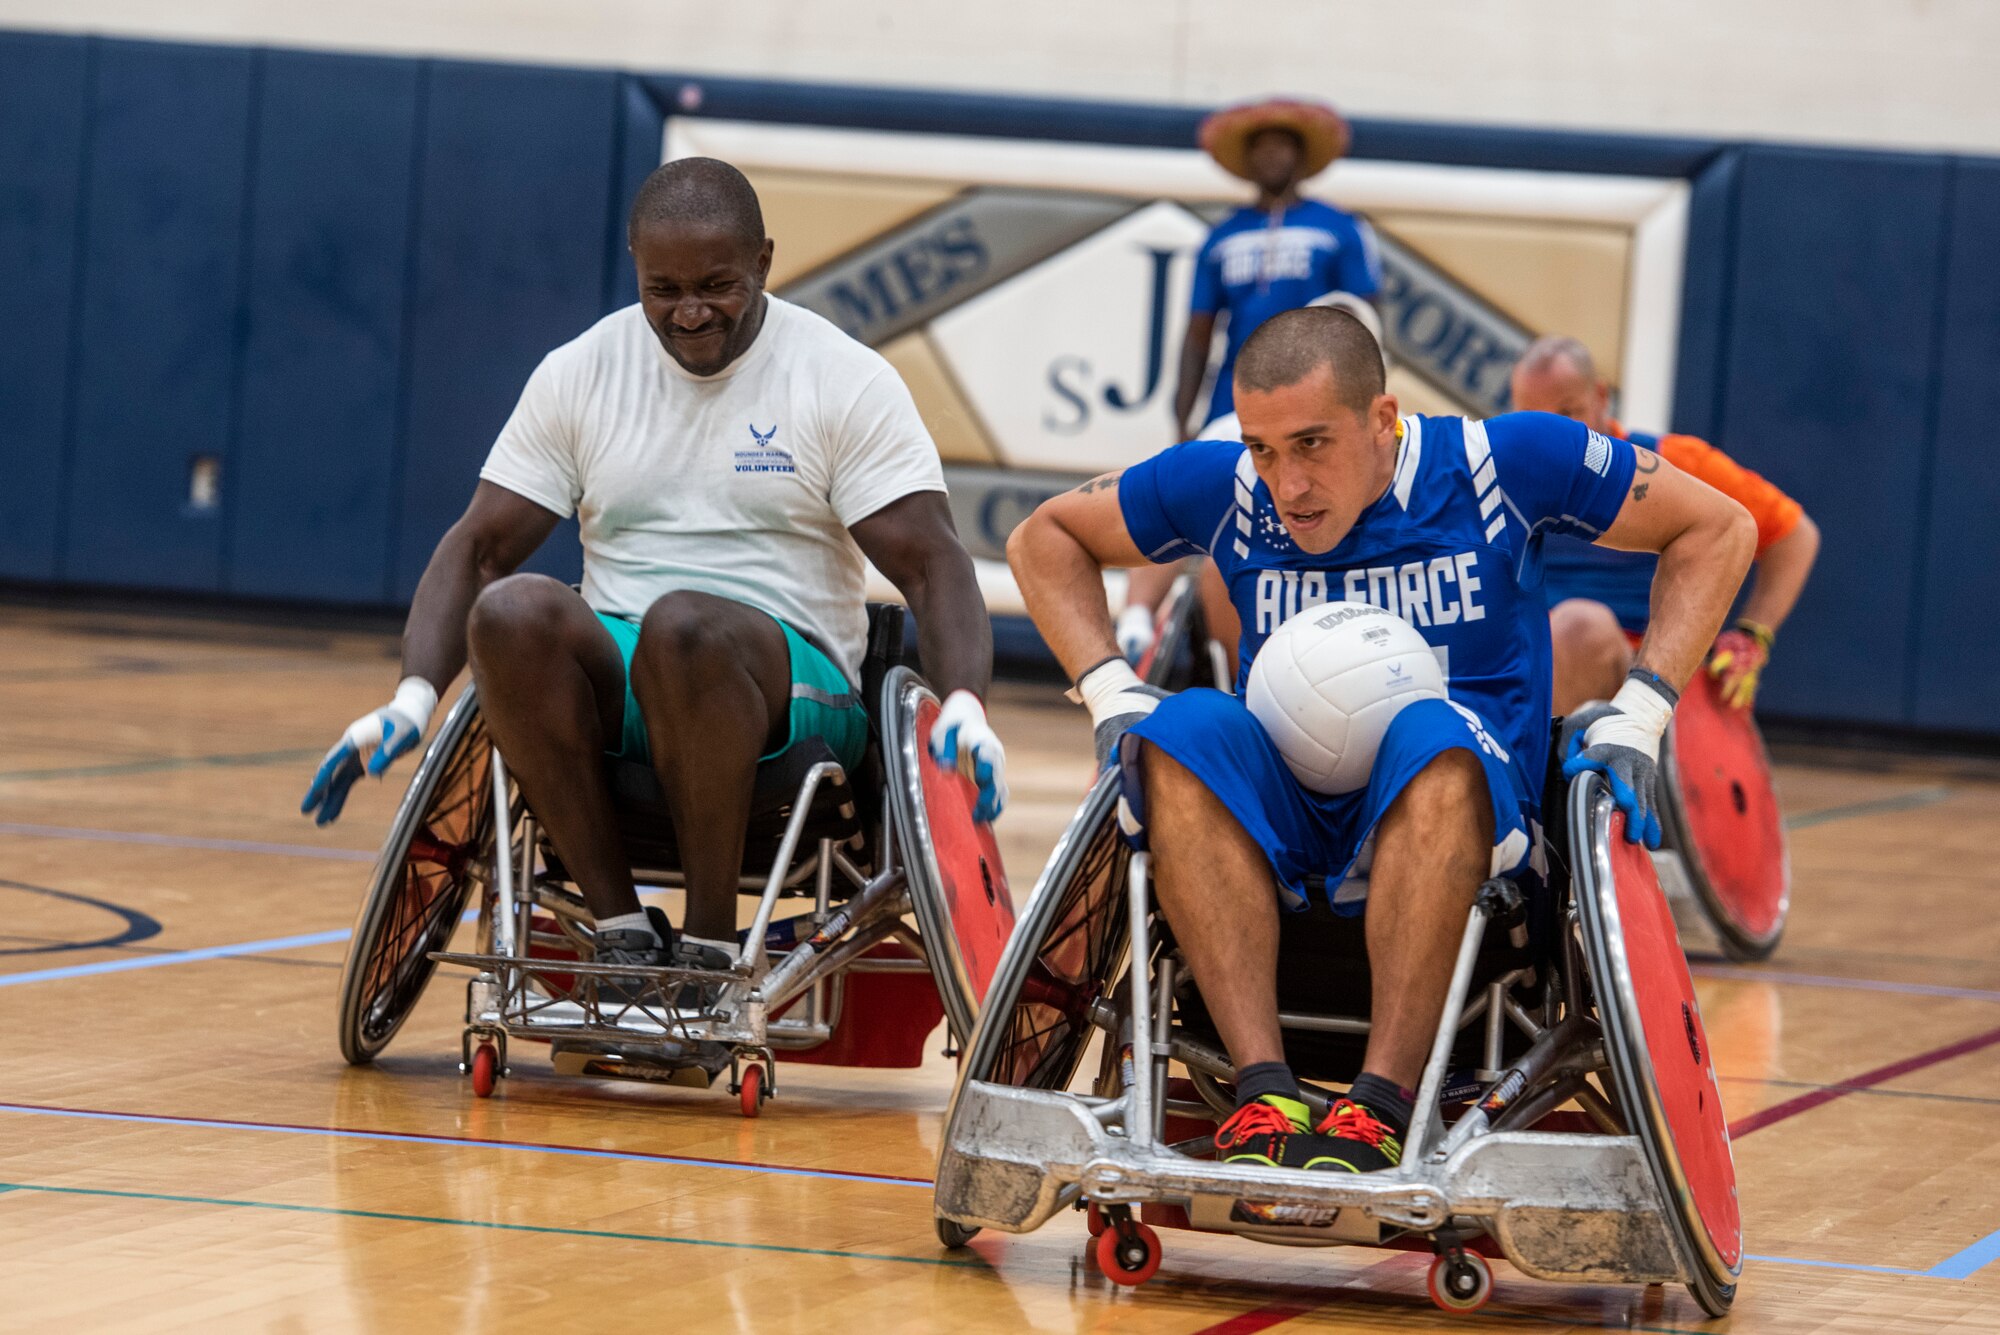 Master Sgt. Quinn Harrington, Air Force Wounded Warrior, races down the court during a wheelchair rugby game for the Air Force Wounded Warrior CARE event, Aug. 23, 2019 at Scott Air Force Base, Ill. During the week, Harrington also competed in sitting volleyball and field events. (U.S. Air Force photo by Senior Airman Daniel Garcia)